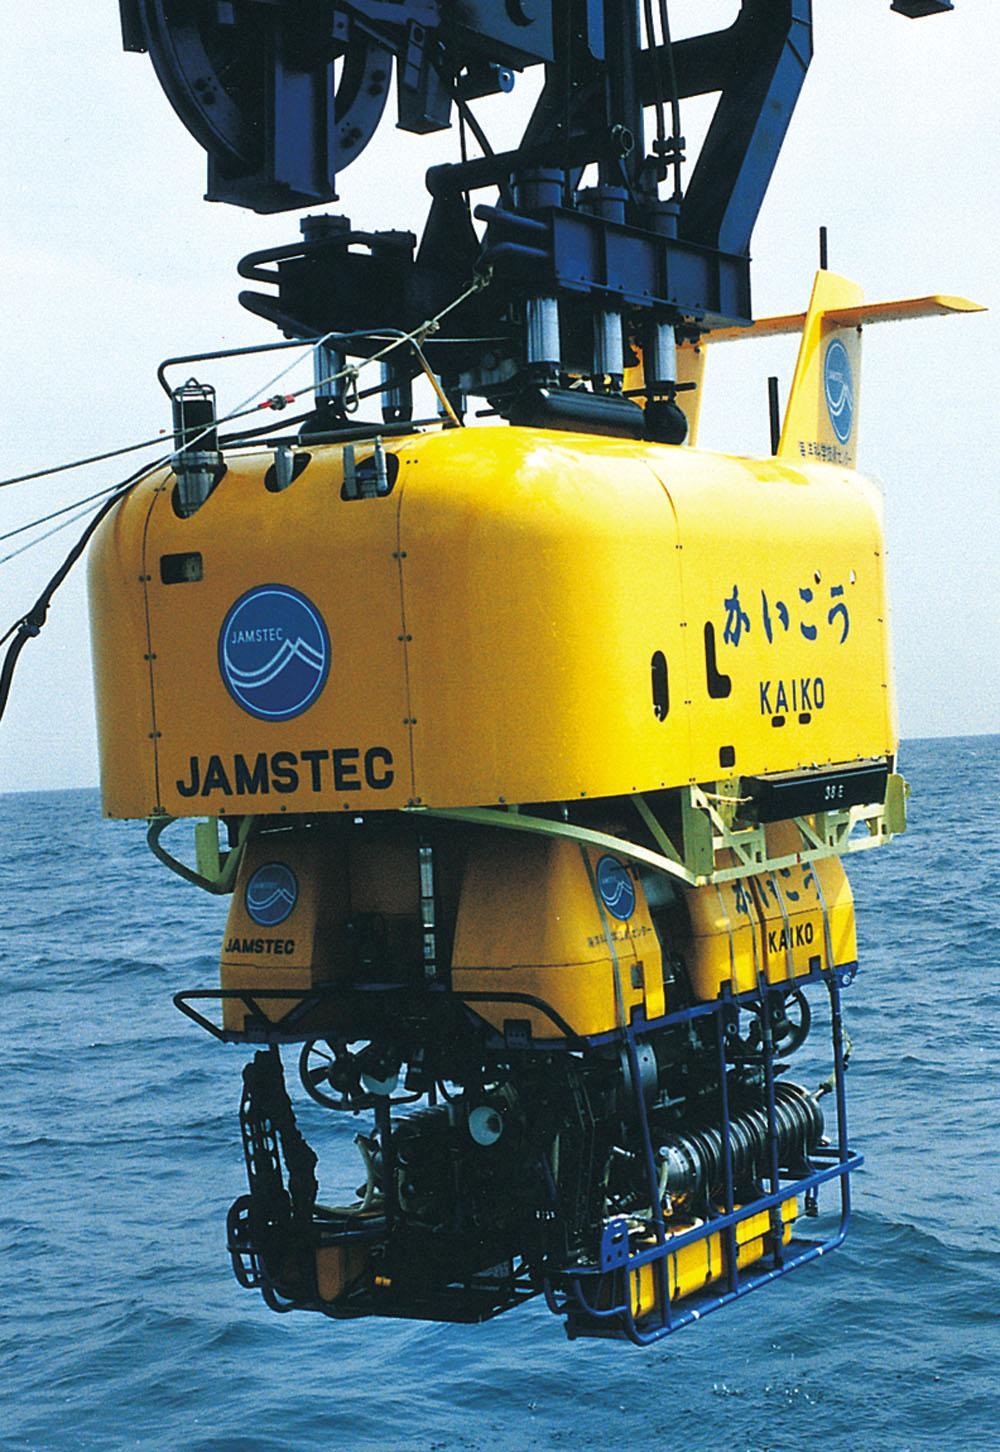 Kaiko, the deepest-diving vehicle presently in operation, descended to a measured depth of 10,914 meters (35,798 feet) near the bottom of the Challenger Deep on March 24, 1995.